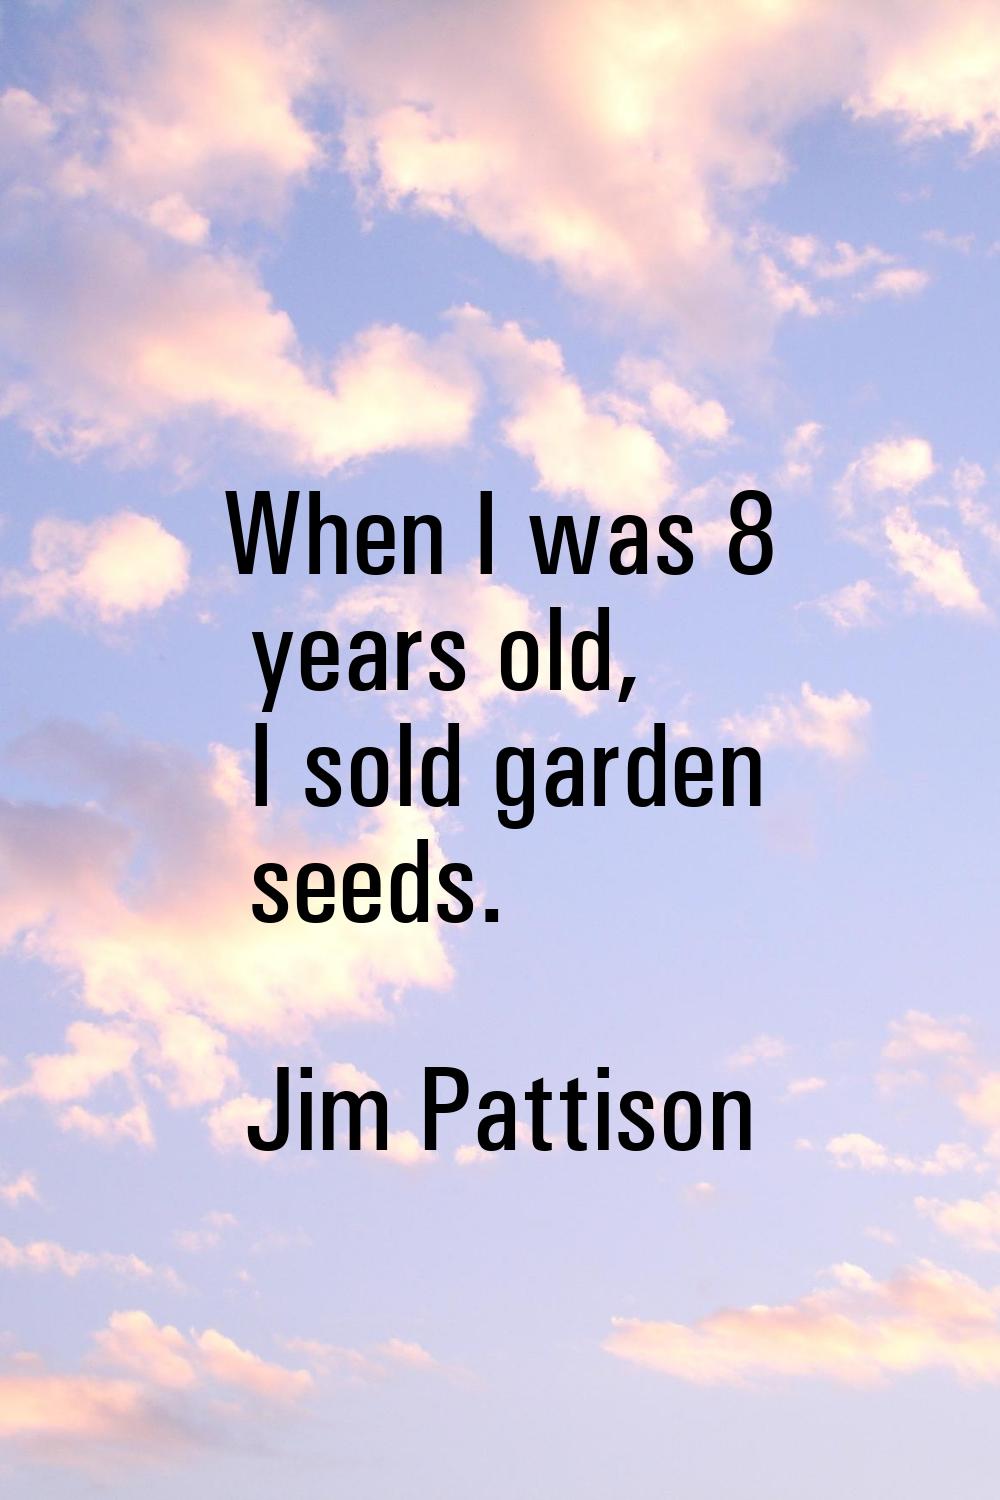 When I was 8 years old, I sold garden seeds.